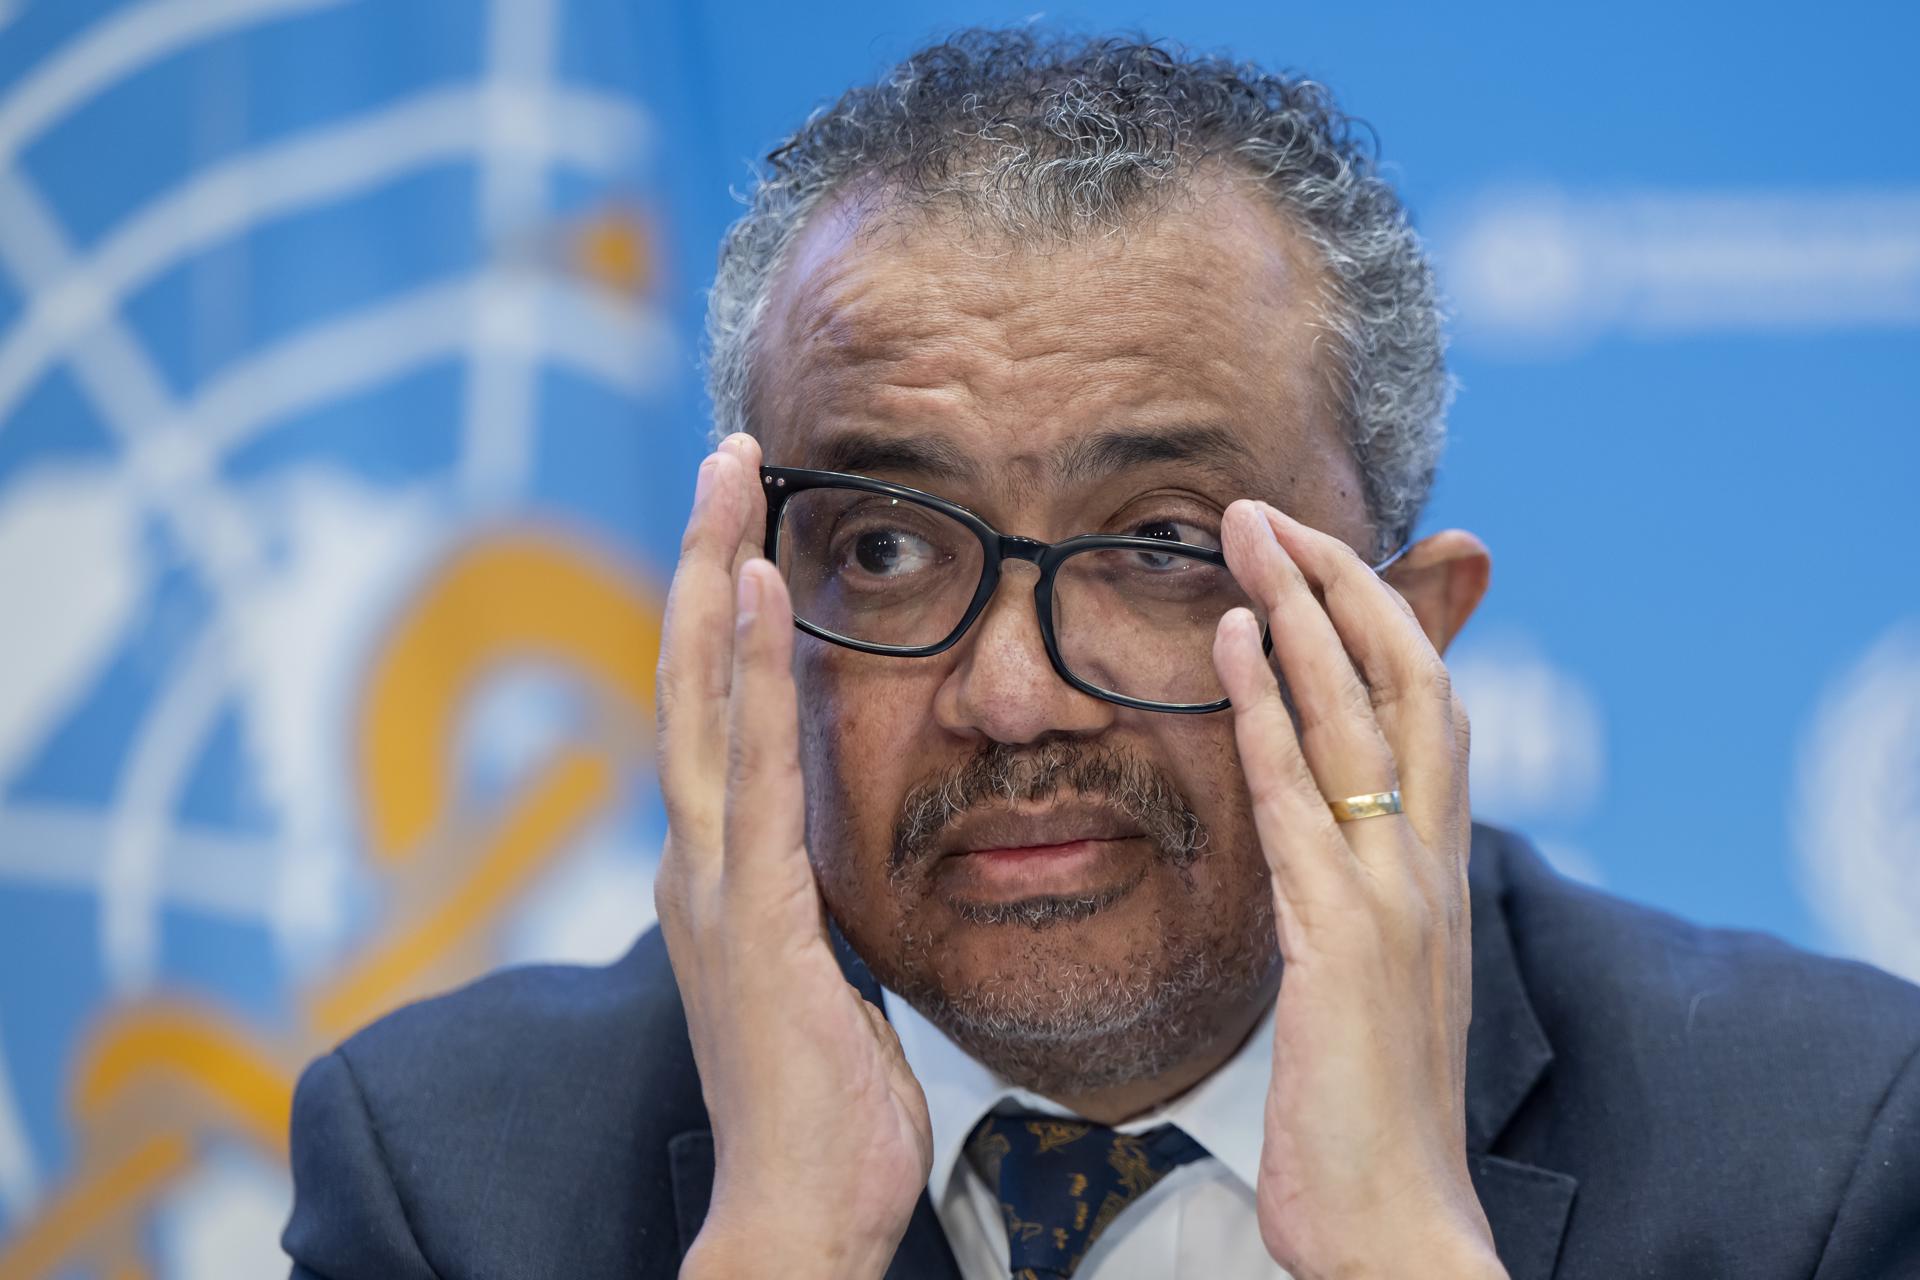 Director General of the World Health Organization (WHO) Tedros Adhanom Ghebreyesus during a press conference organized by the Geneva Association of United Nations Correspondents (ACANU) at the WHO headquarters in Geneva, Switzerland, 14 December 2022. EFE-EPA/File/MARTIAL TREZZINI